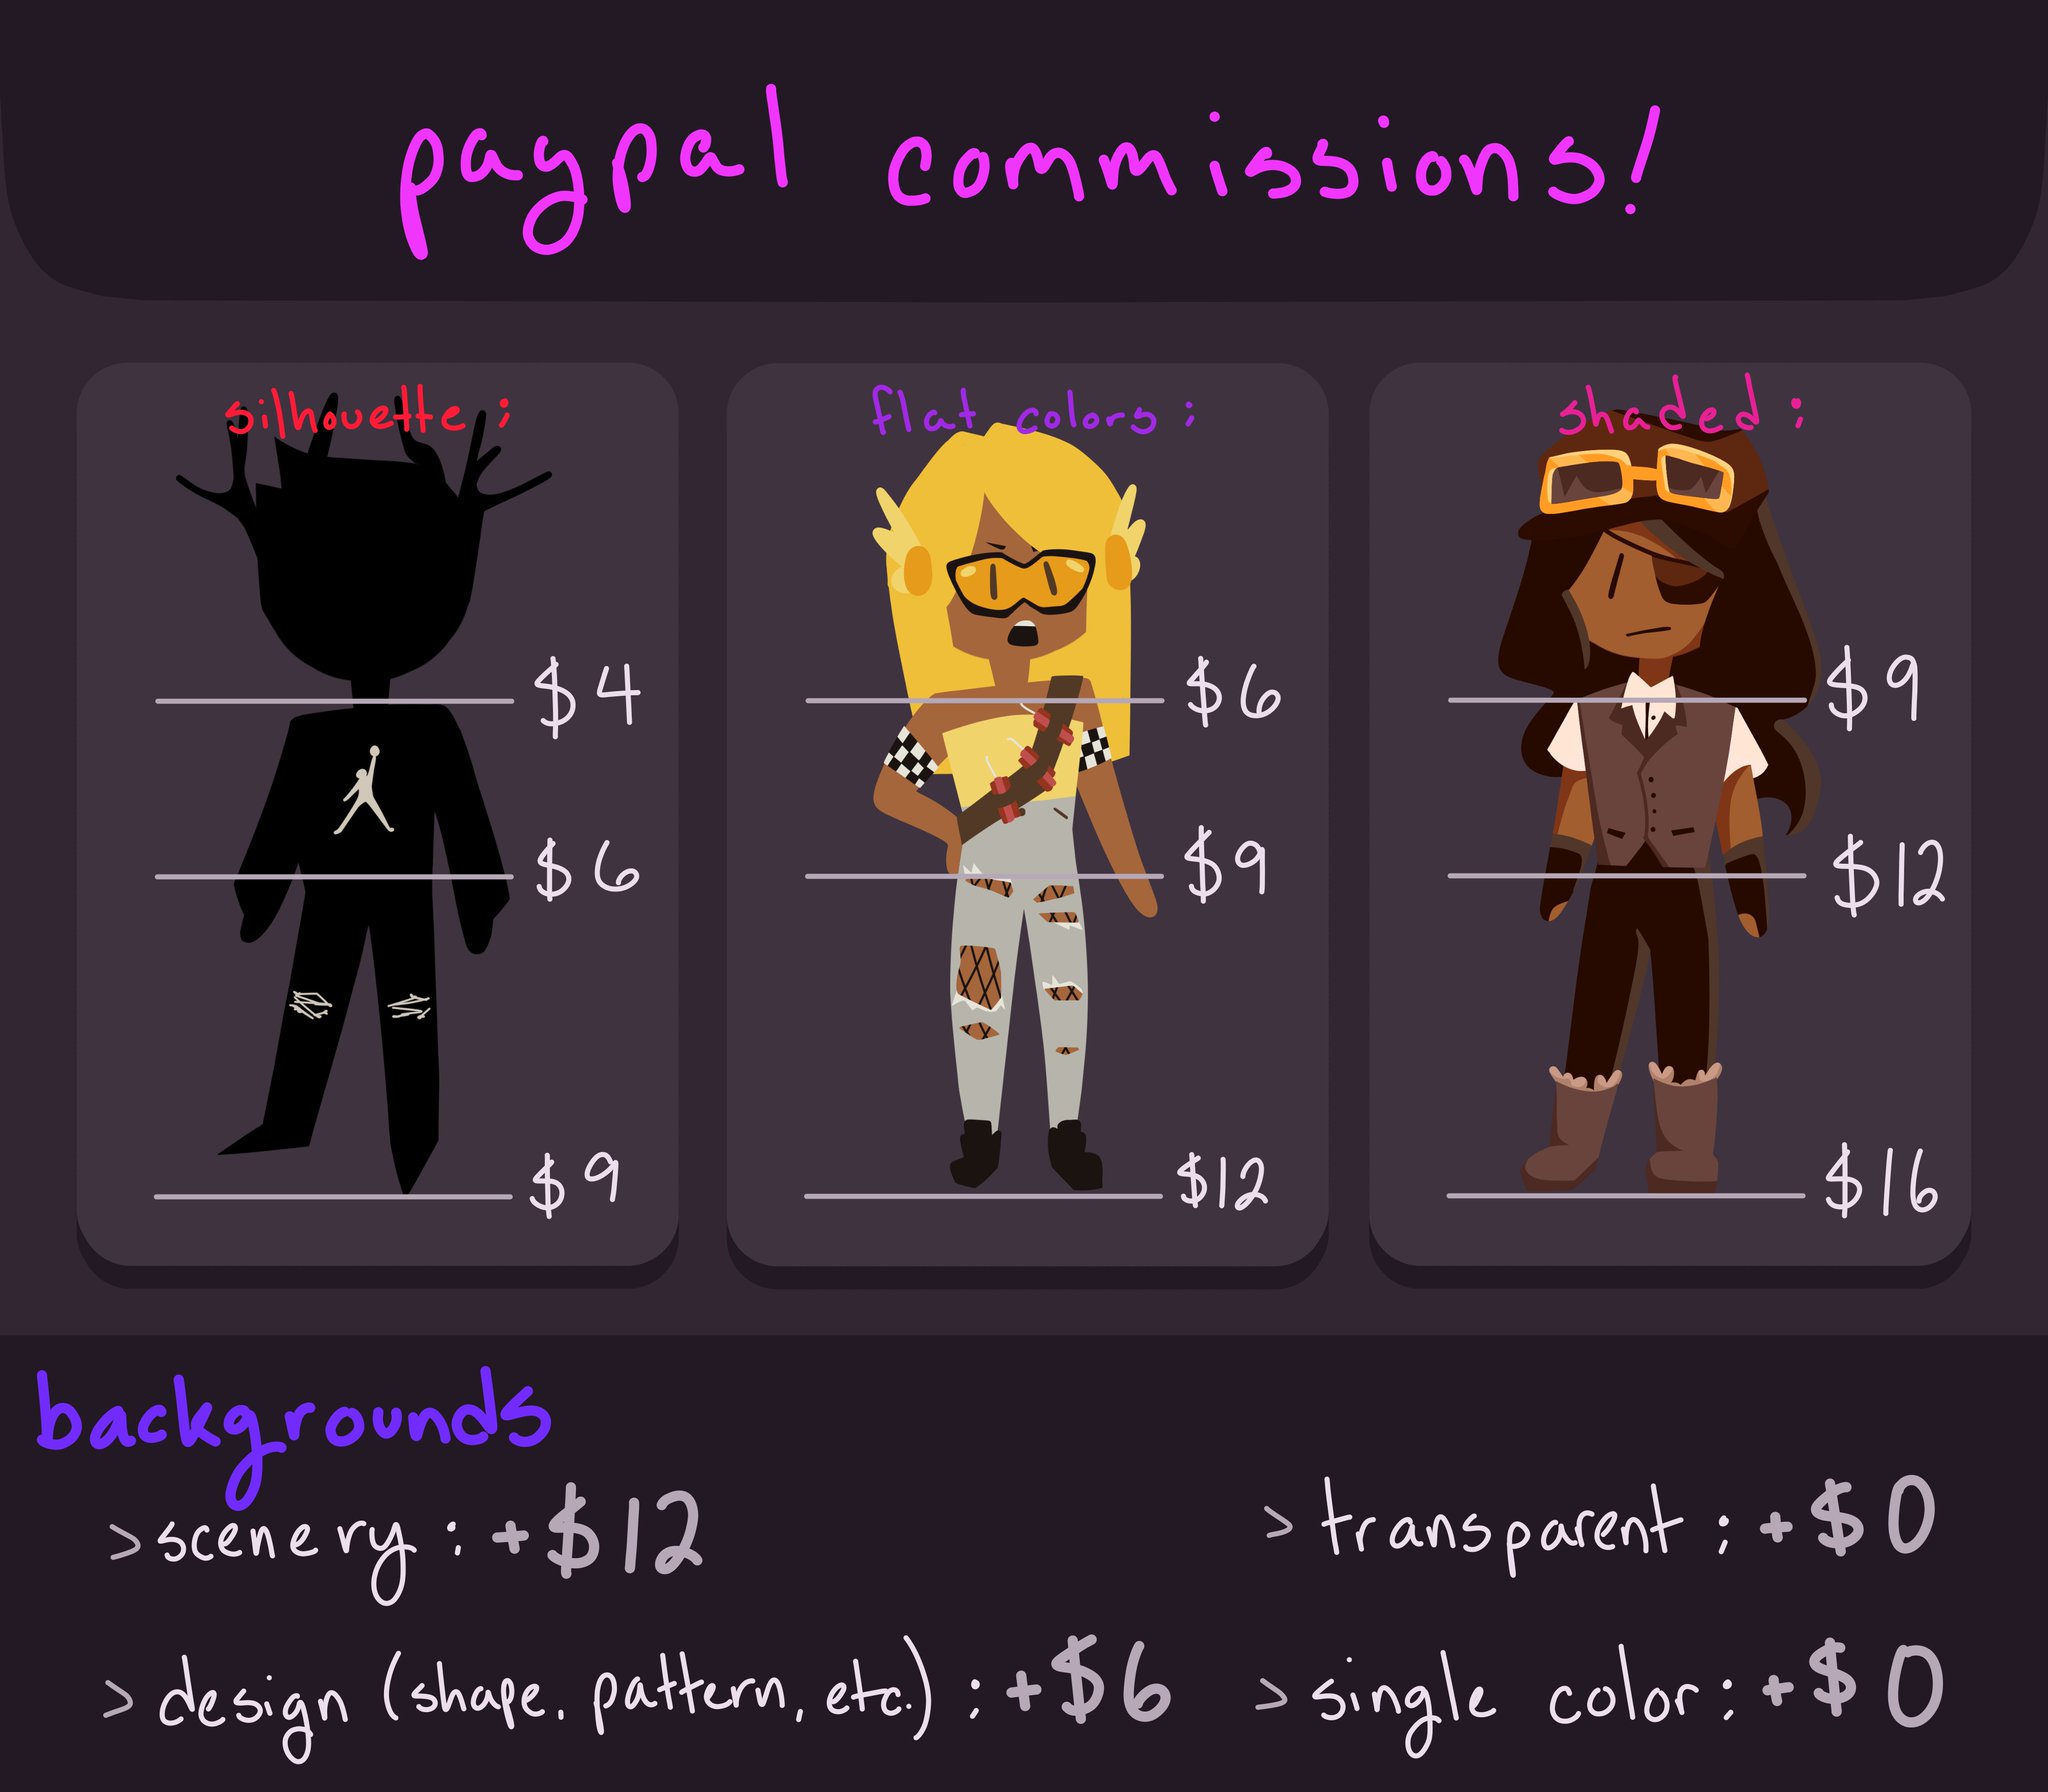 Sol On Twitter Commissions Are Open If Youd Like - 